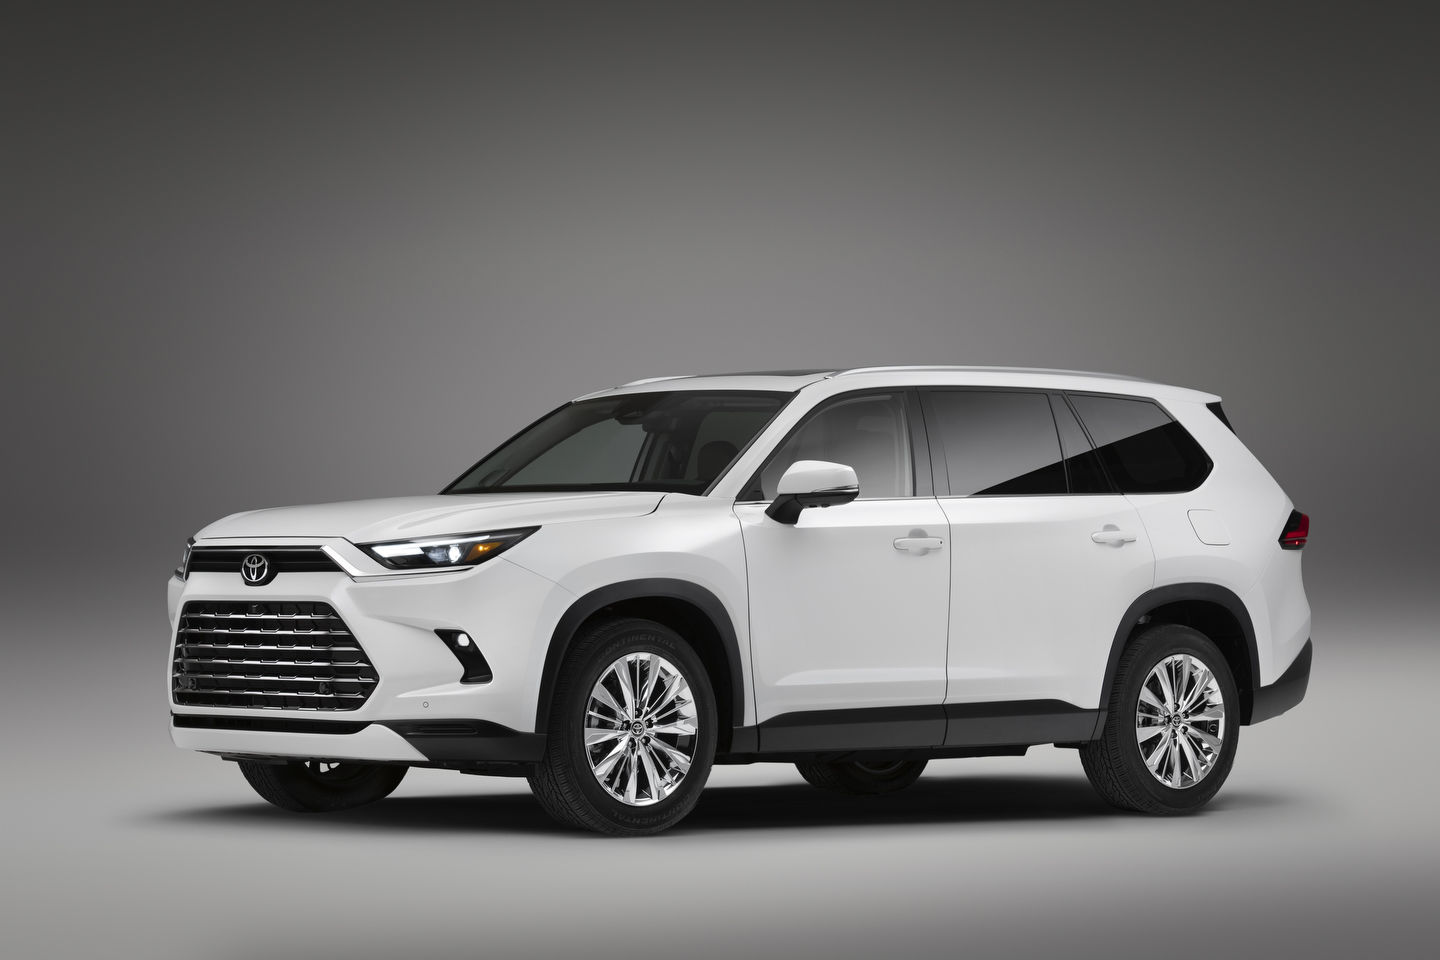 2024 Grand Highlander: Diversified Powertrain Options with Toyota's Iconic Design